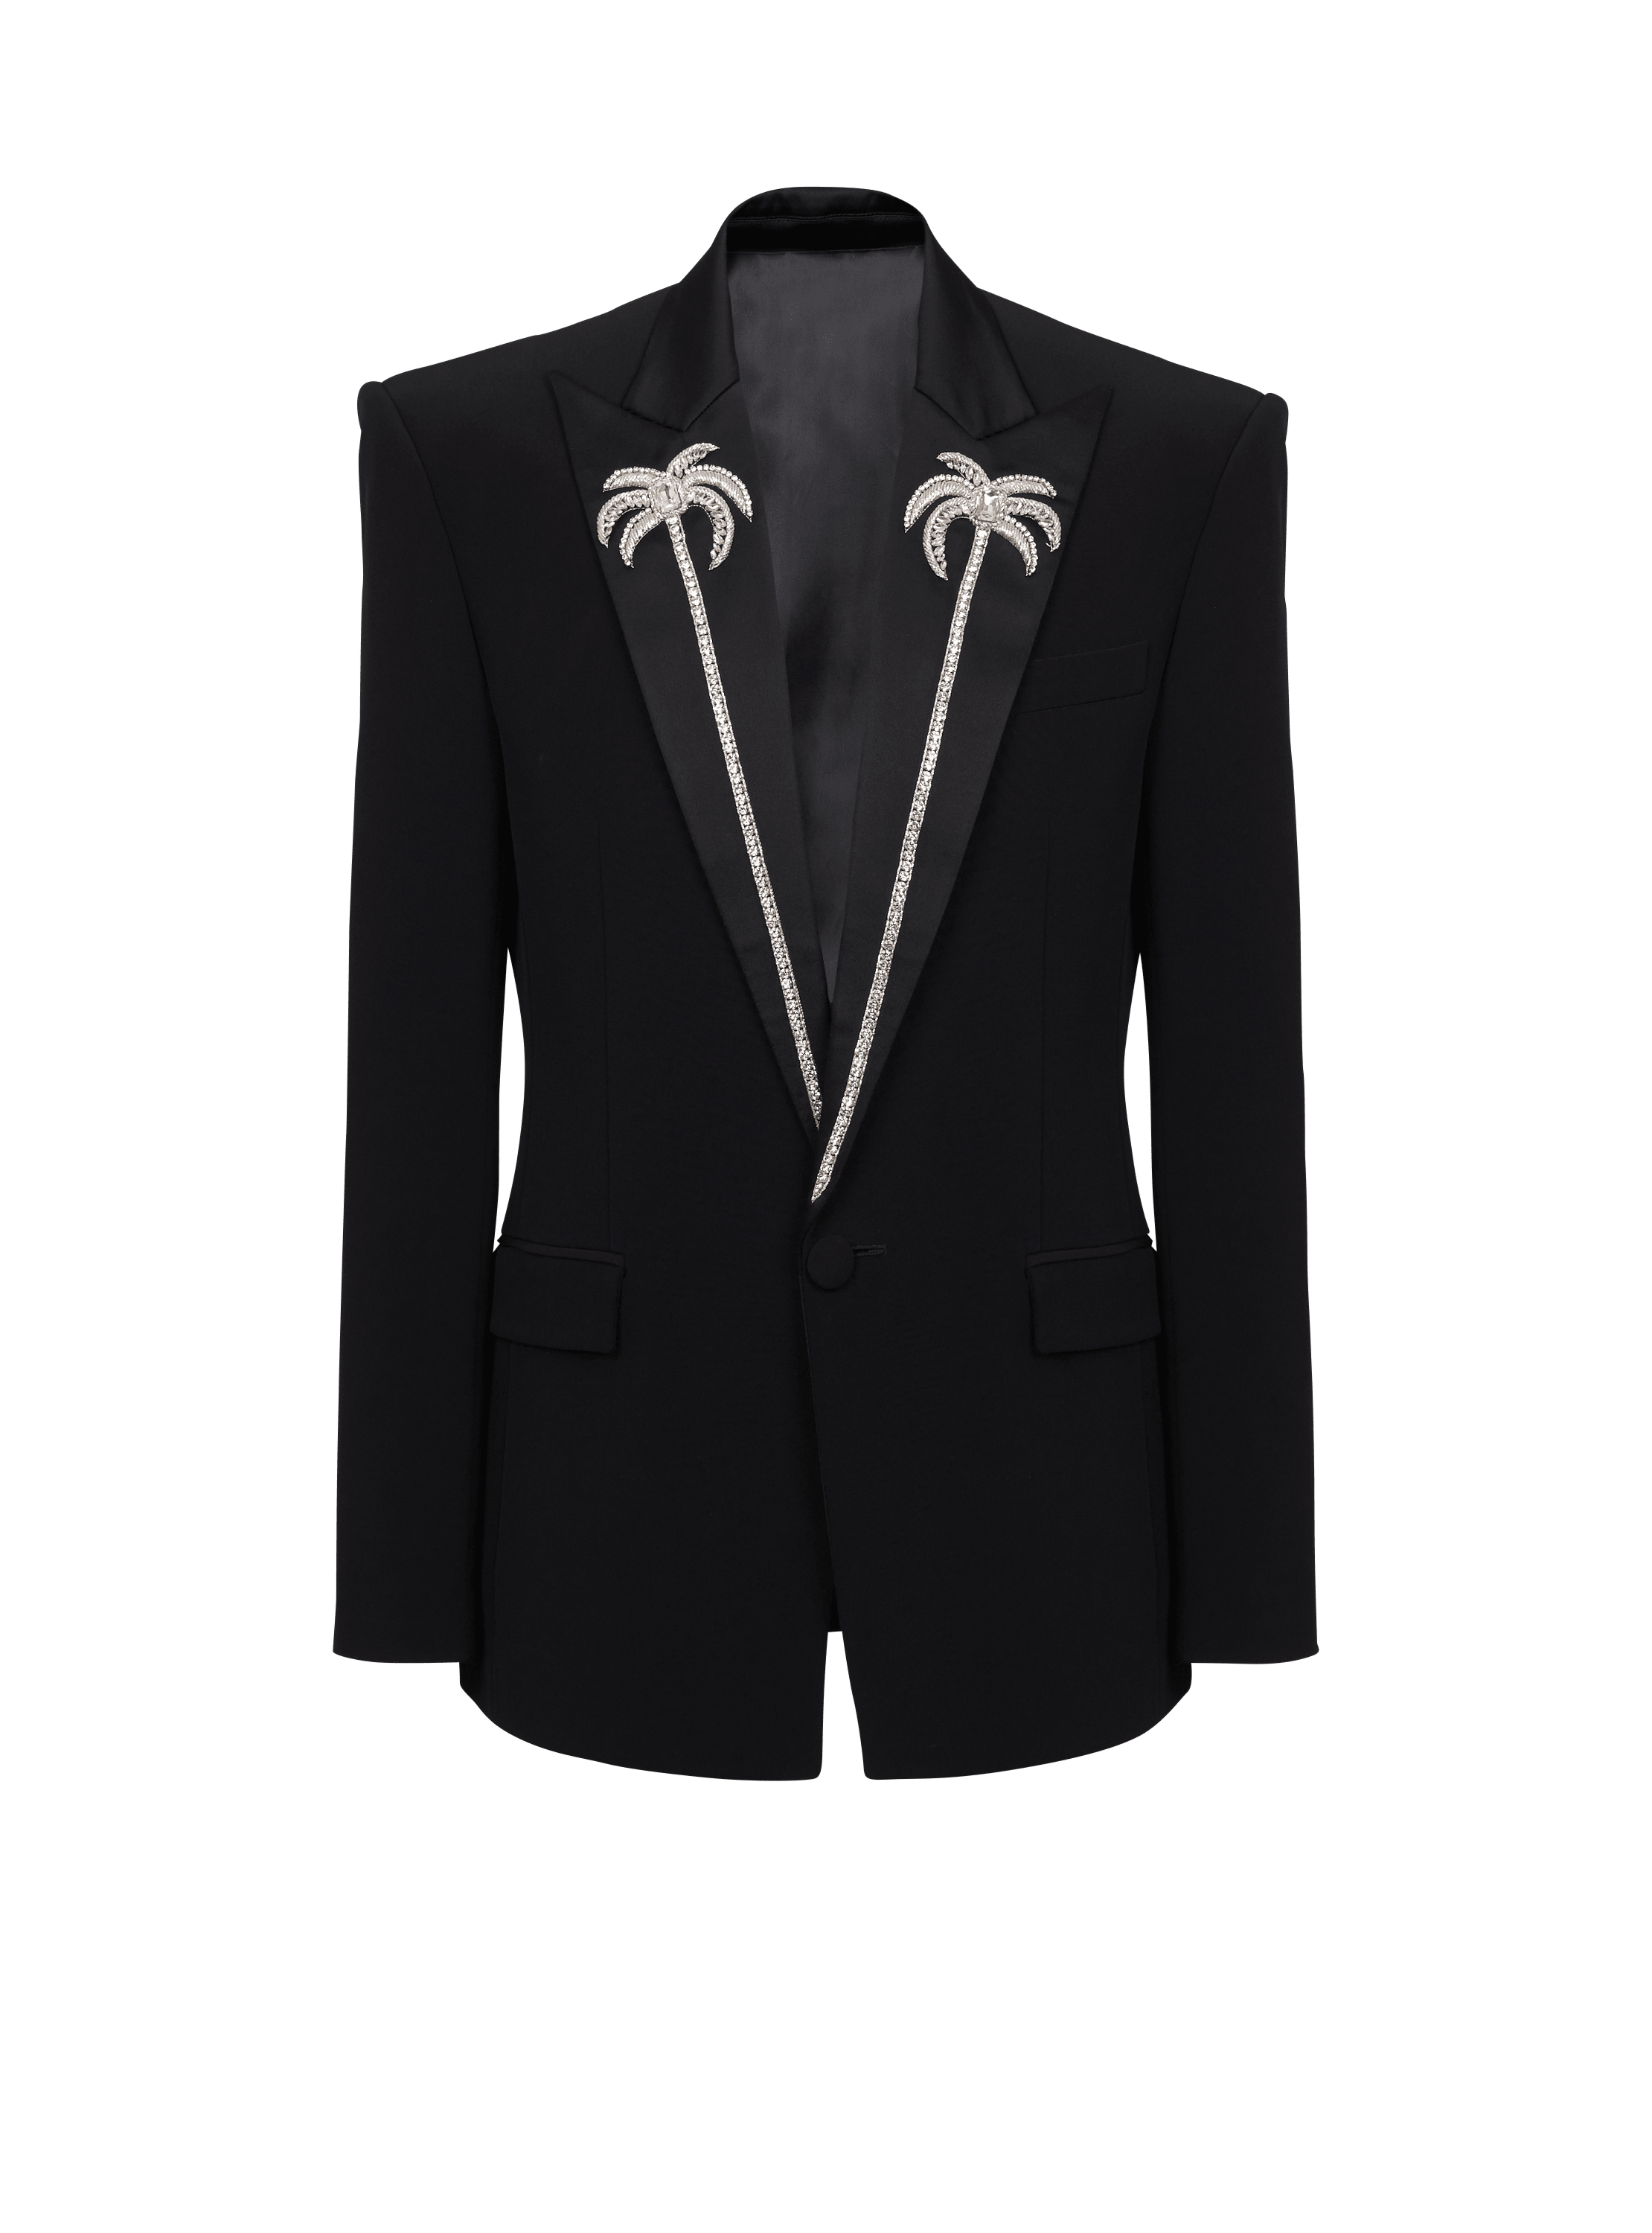 1-button jacket with embroidered palm tree collar